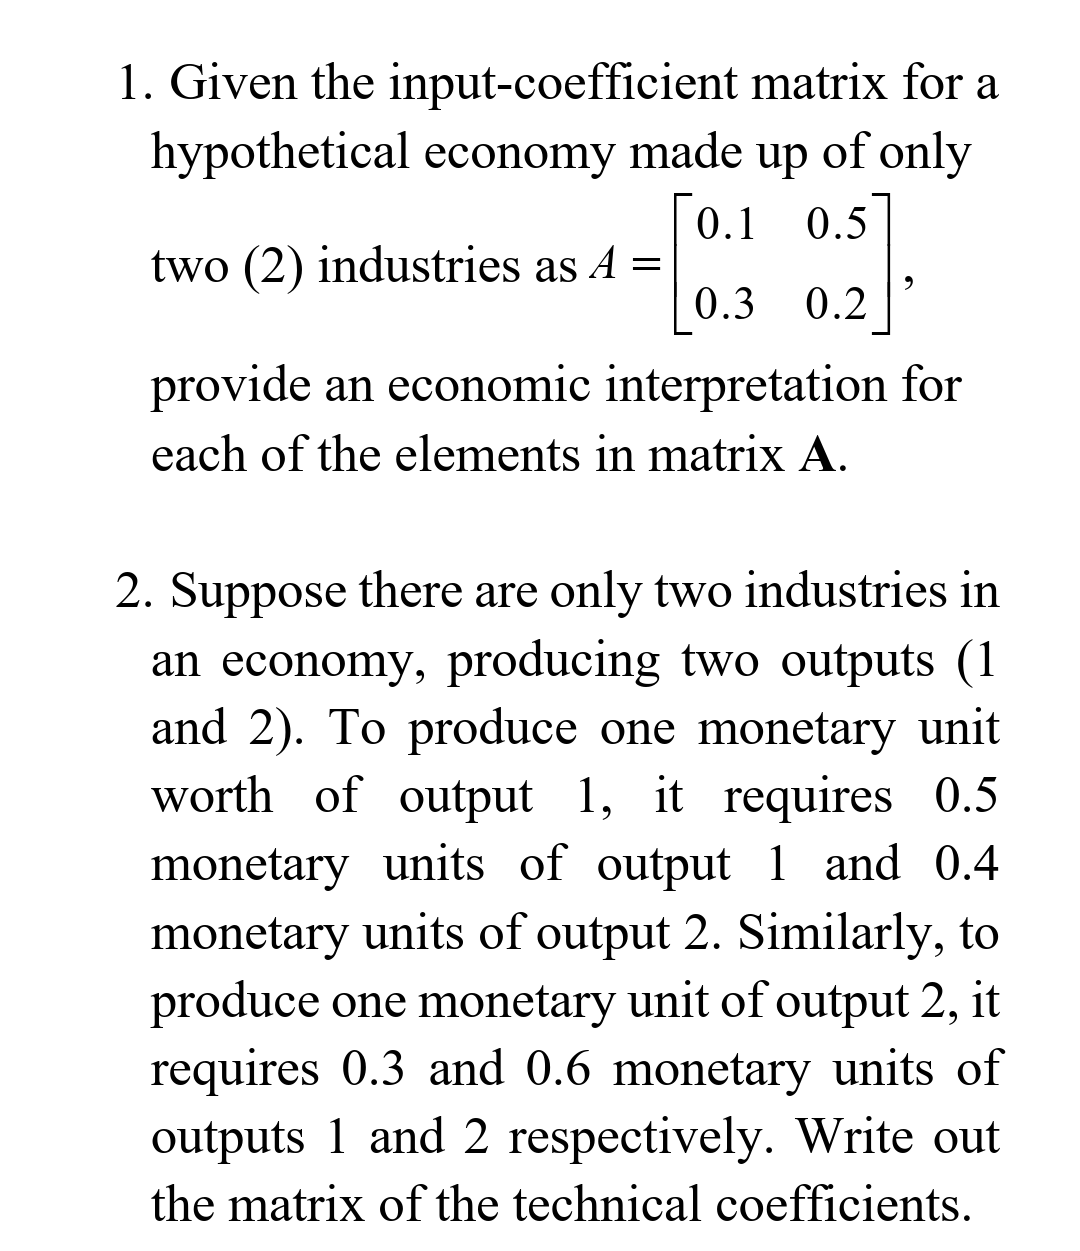 1. Given the input-coefficient matrix for a
hypothetical economy made up of only
0.1 0.5
two (2) industries as A =
0.3 0.2
provide an economic interpretation for
each of the elements in matrix A.
2. Suppose there are only two industries in
an economy, producing two outputs (1
and 2). To produce one monetary unit
worth of output 1, it requires 0.5
monetary units of output 1 and 0.4
monetary units of output 2. Similarly, to
produce one monetary unit of output 2, it
requires 0.3 and 0.6 monetary units of
outputs 1 and 2 respectively. Write out
the matrix of the technical coefficients.
